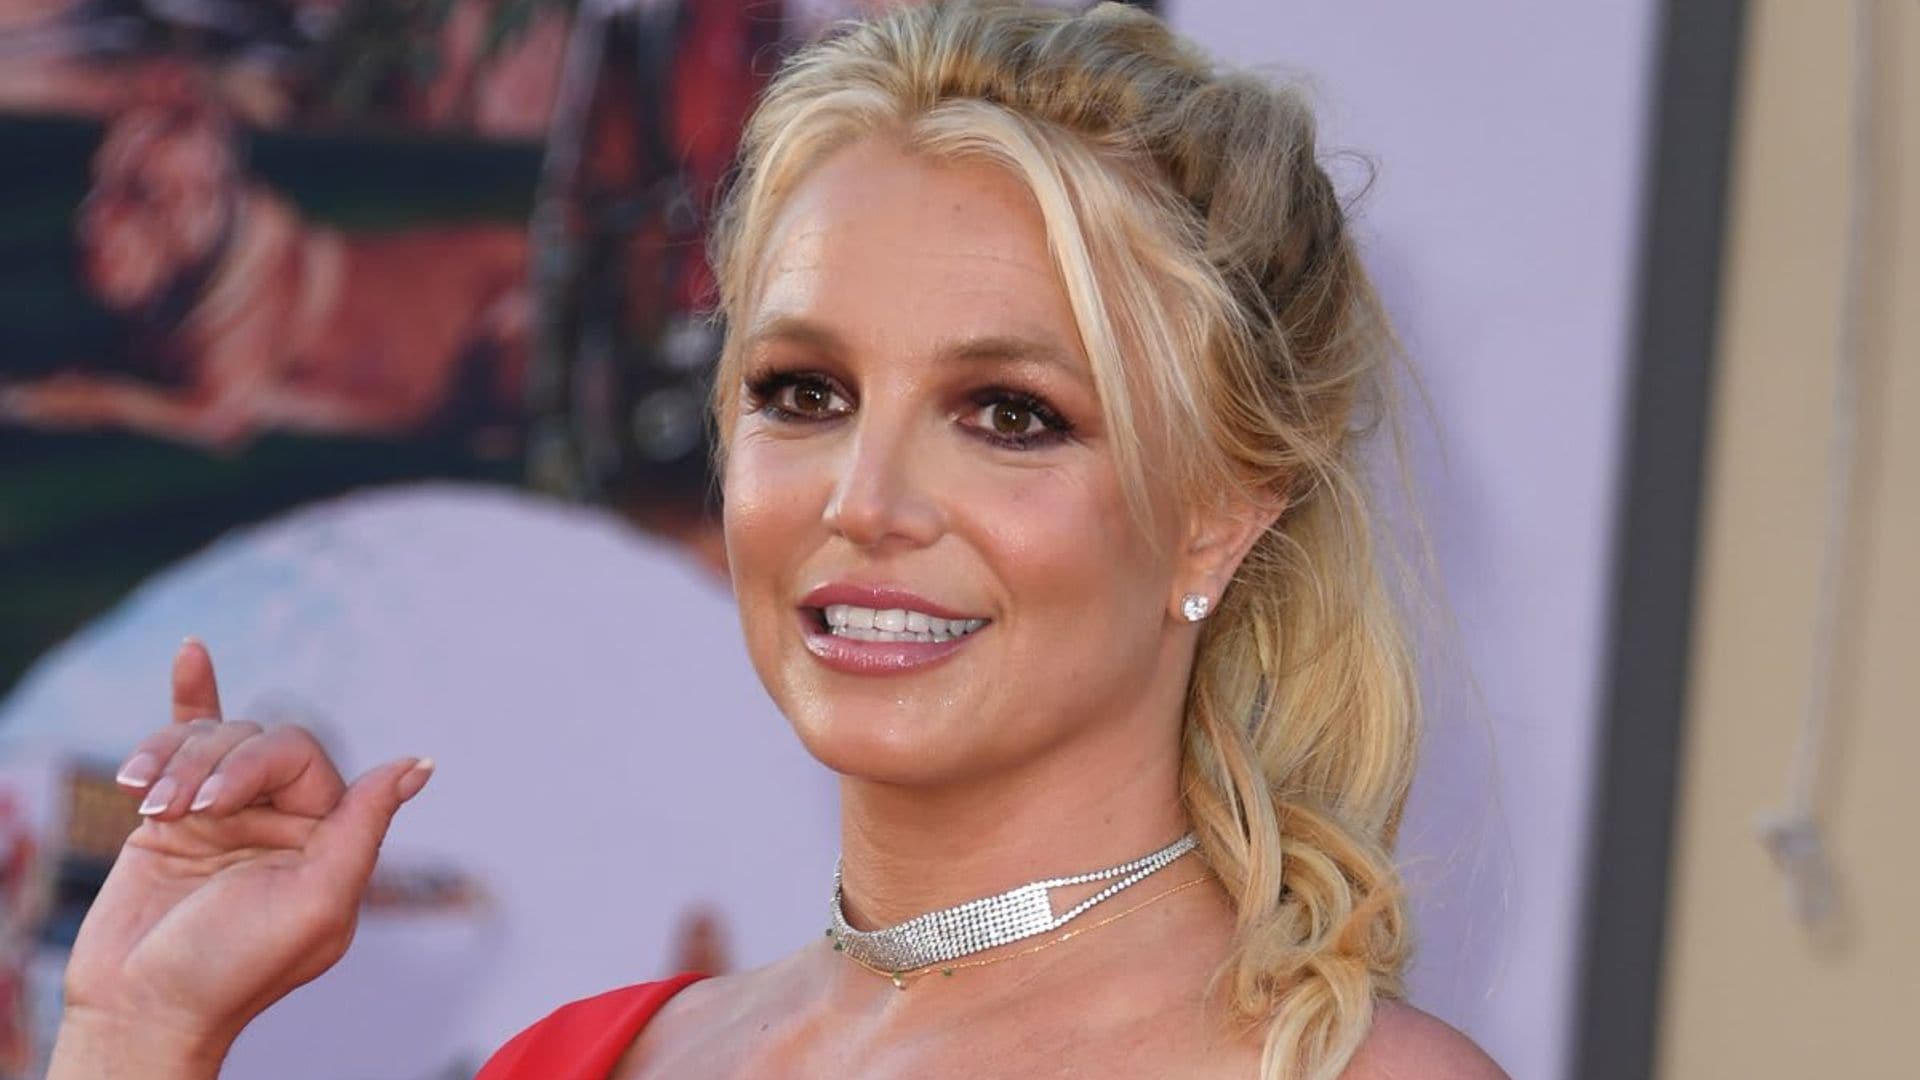 Britney Spears was spotted out for the first time in months with her son and boyfriend